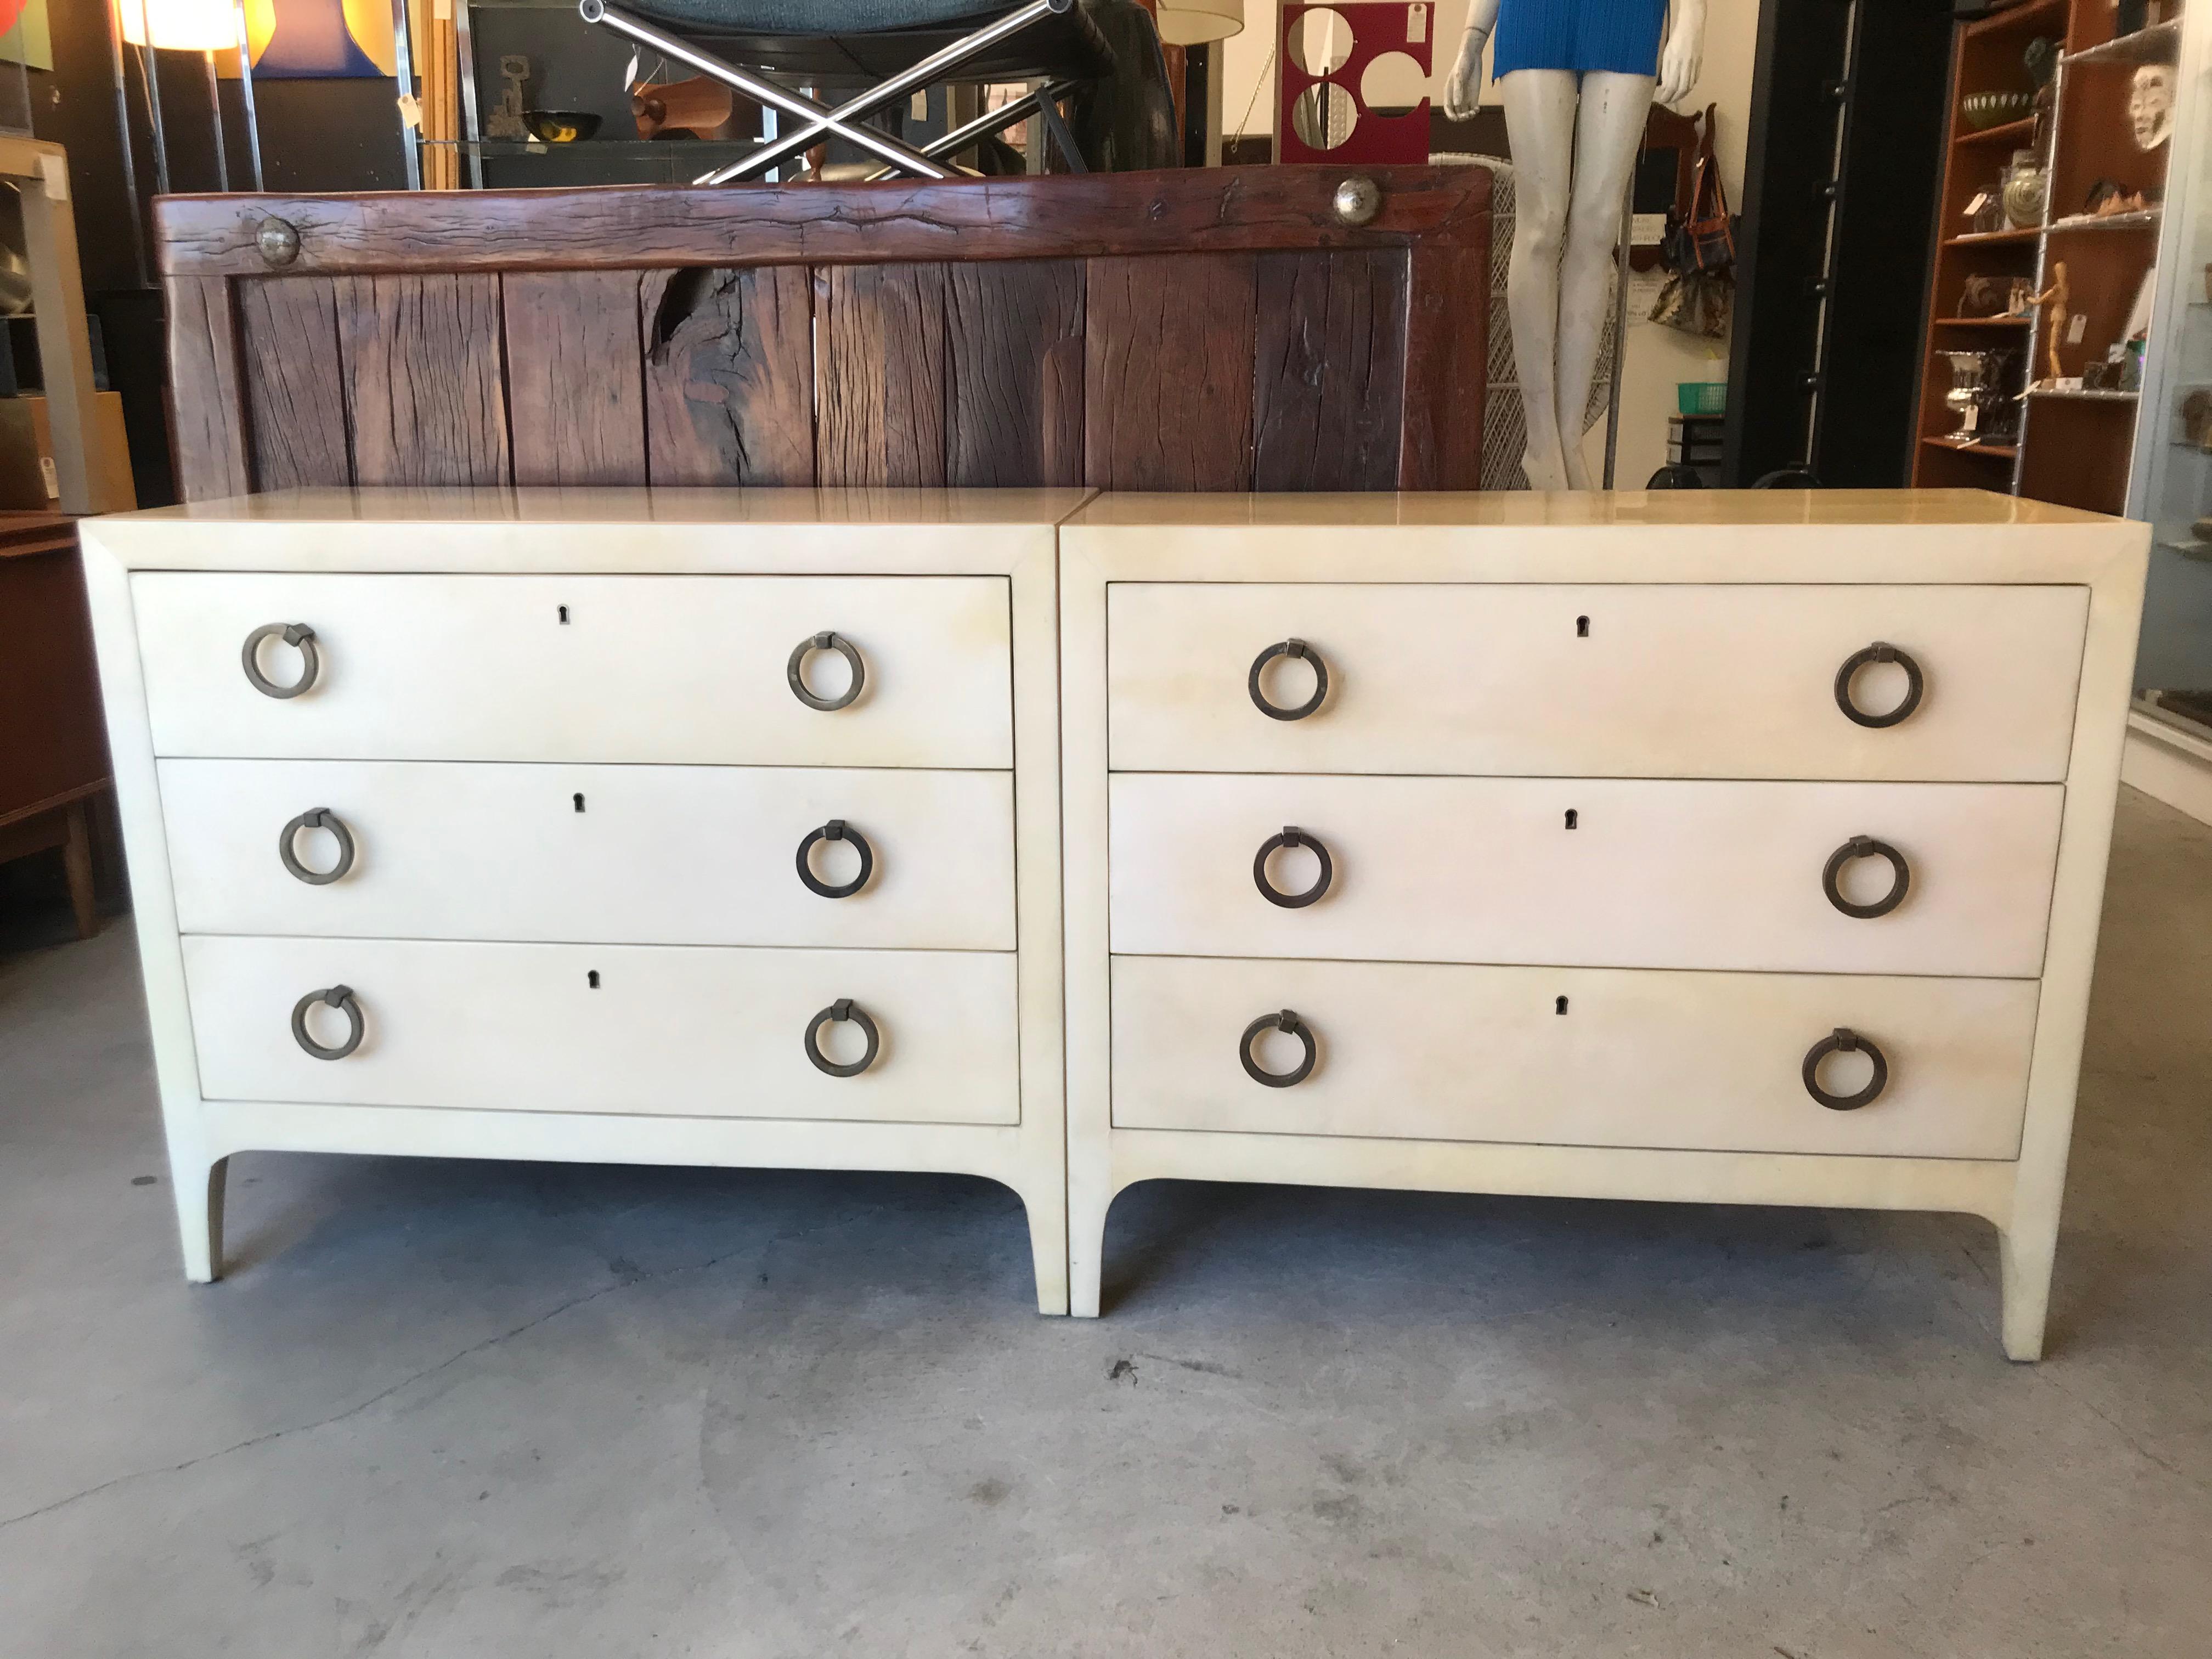 Elegant and handsome pair of dressers.
Ultra modern designs.
Quality construction.
Mahogany wood covered with goatskin / vellum veneer. 
Clean lines in a beautiful ivory hue. 
Circular bronze pulls.
Fine original condition with a nice patina.
Great